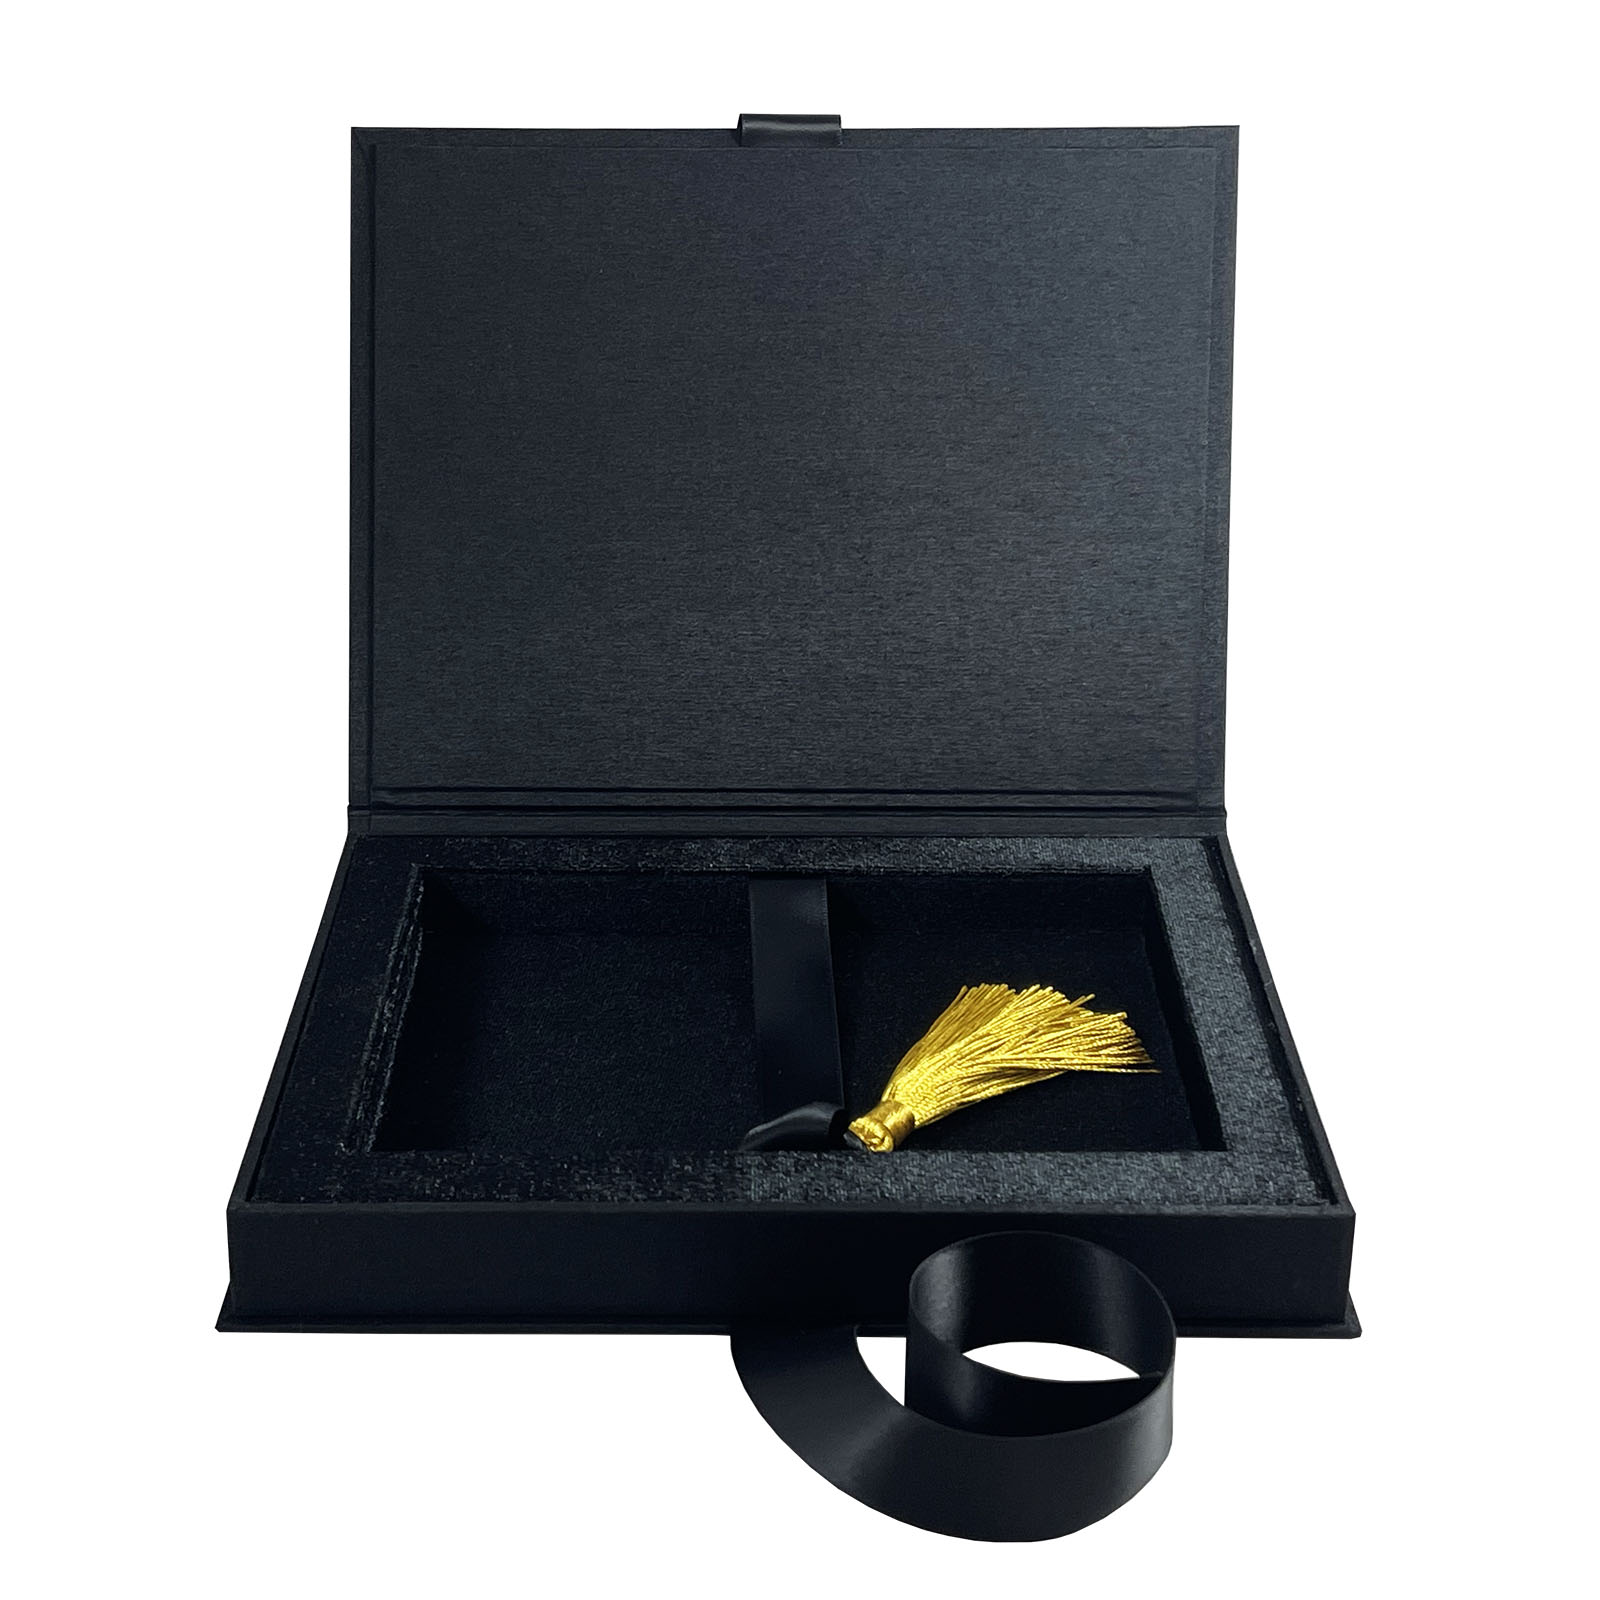 Hinged lid box with black silk and velvet for acrylic invitation cards